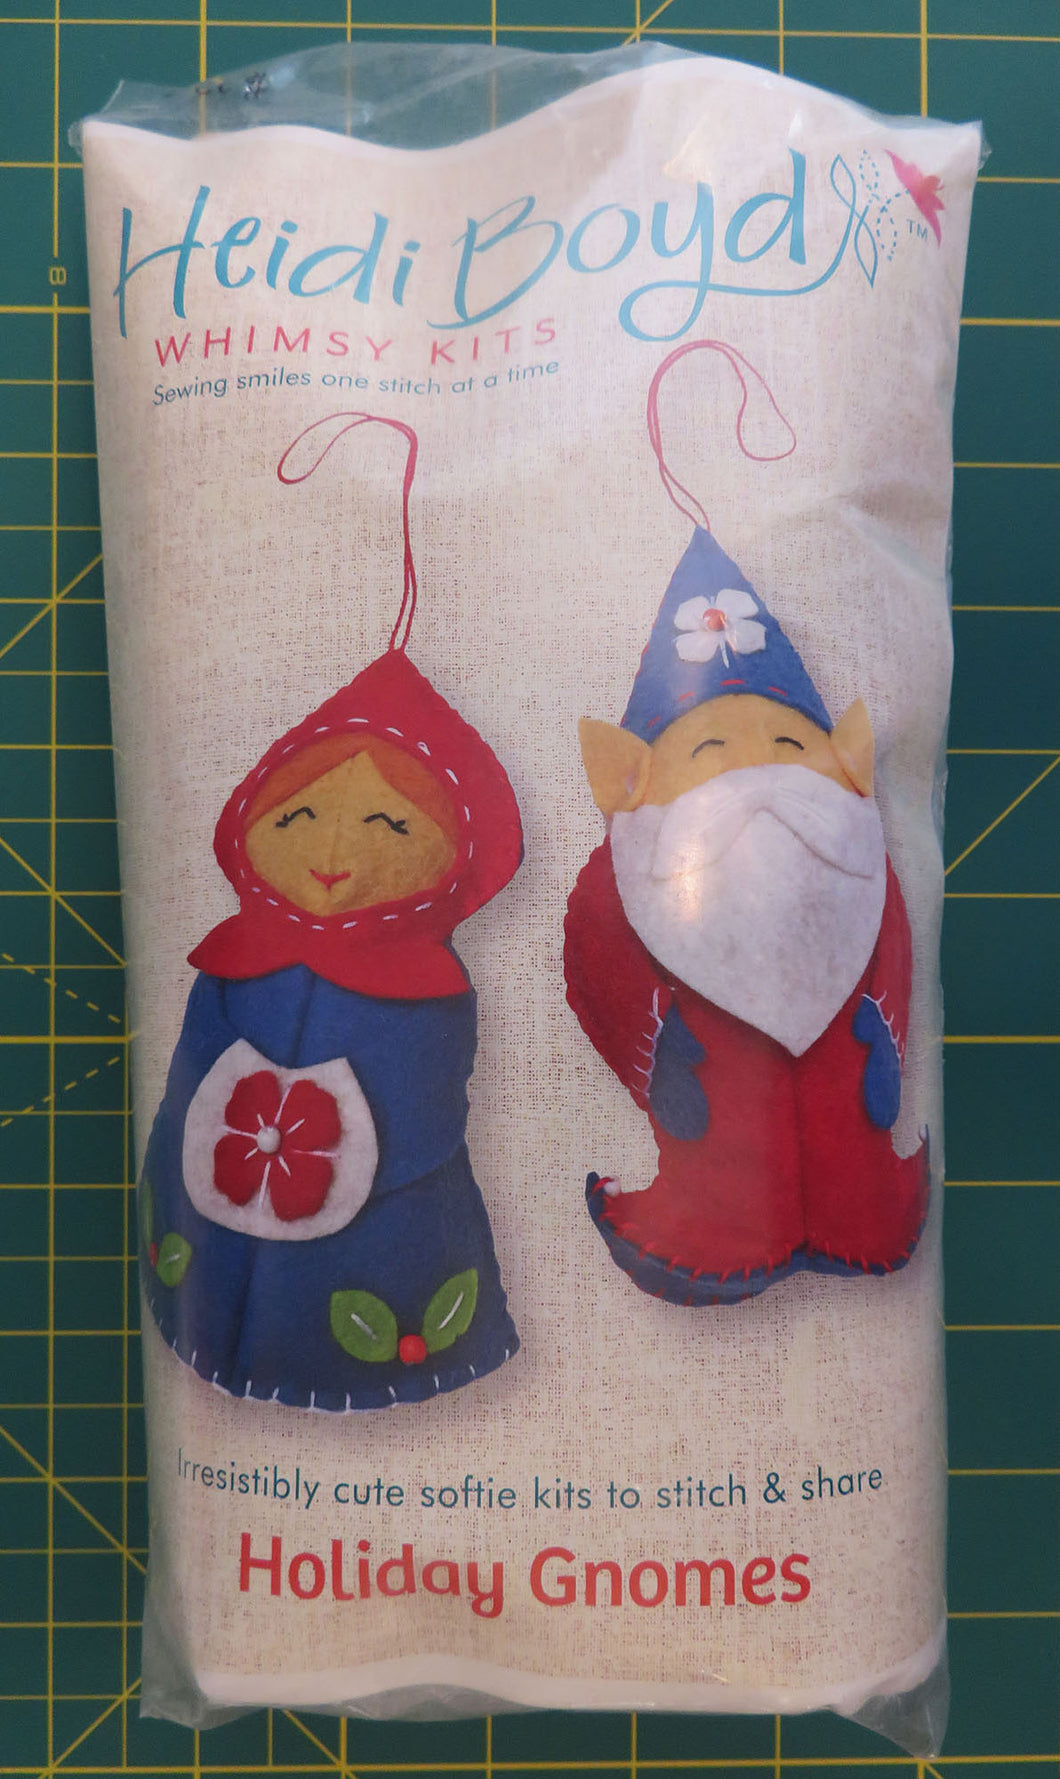 Holiday Gnomes By Heidi Boyd From Brewer